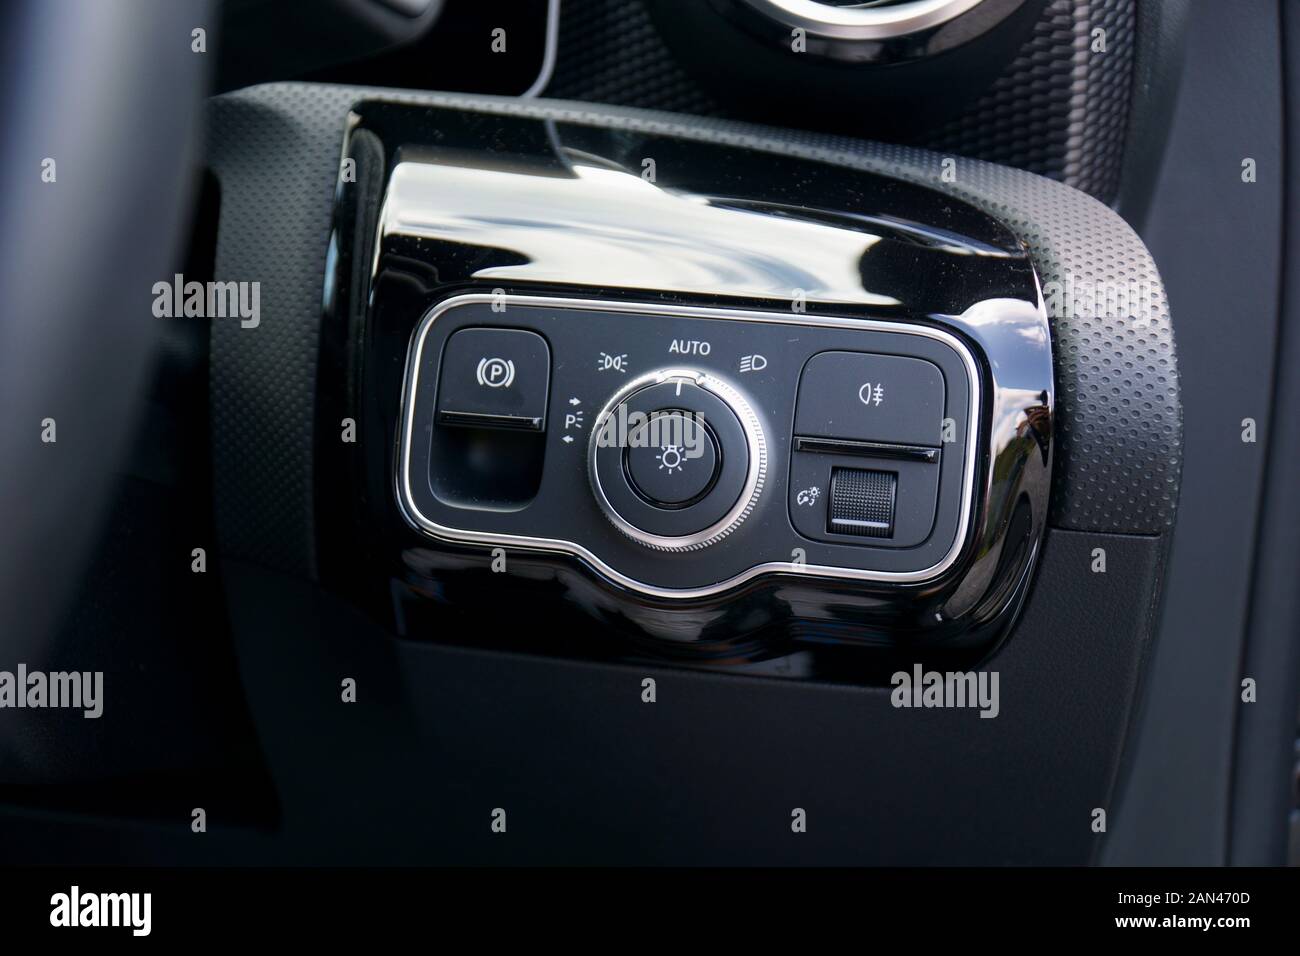 Headlight controls on a car with automatic headlights Stock Photo